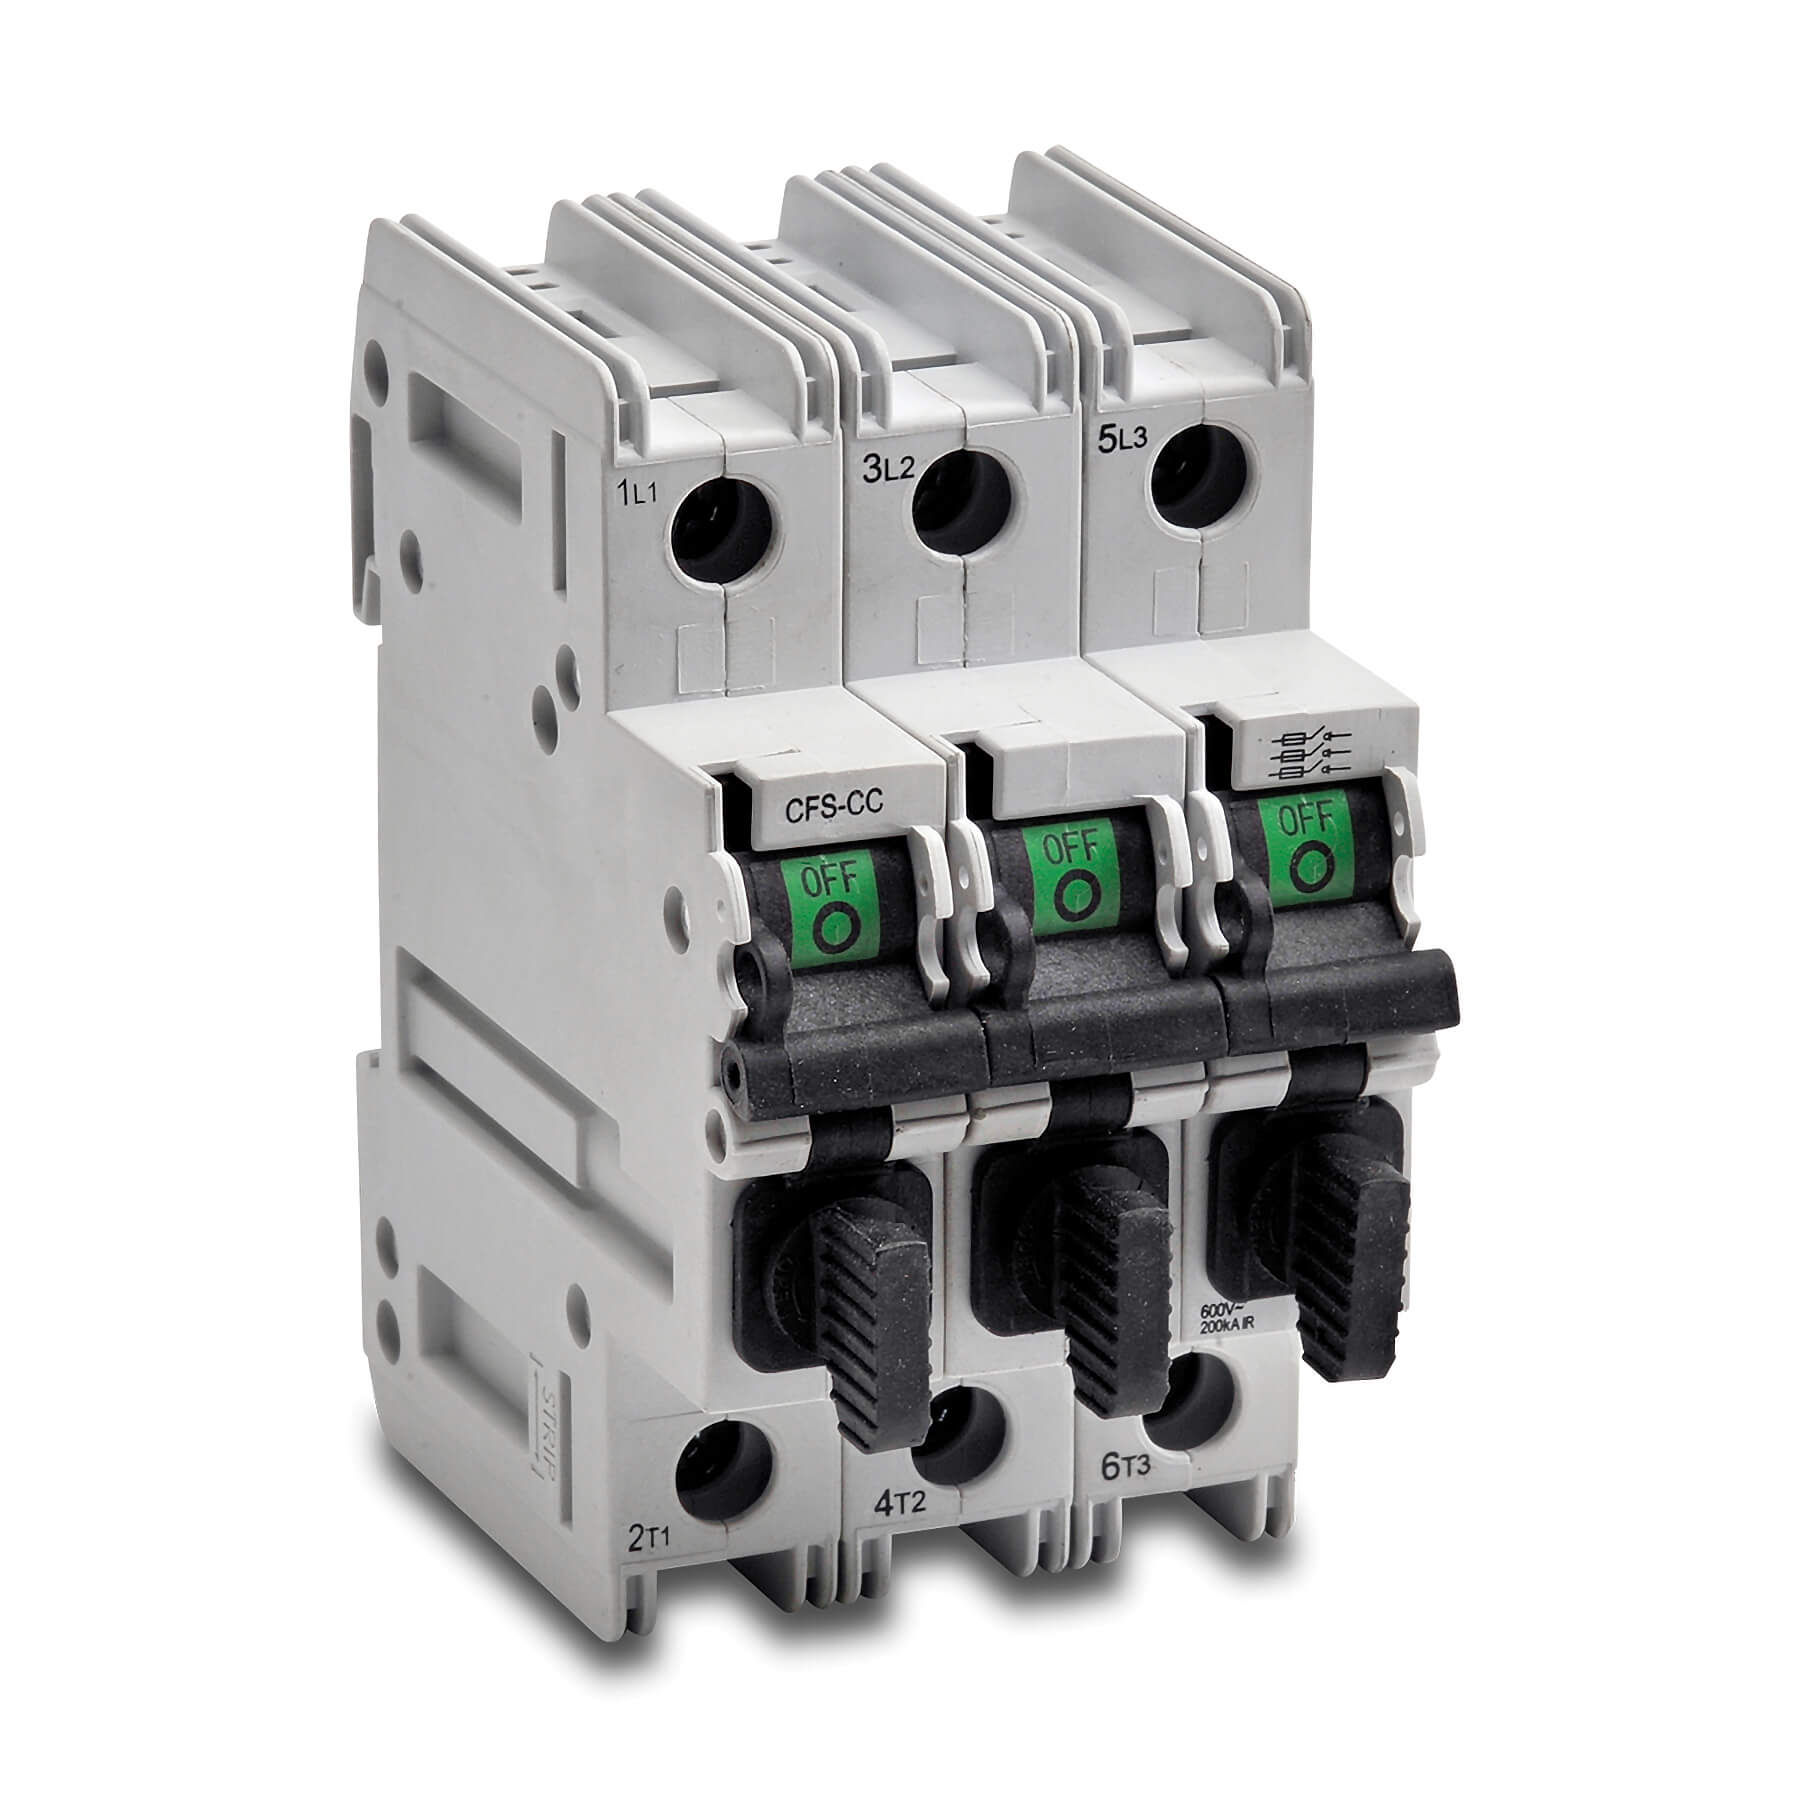 2-for-1 Control Panel Components Deliver Savings